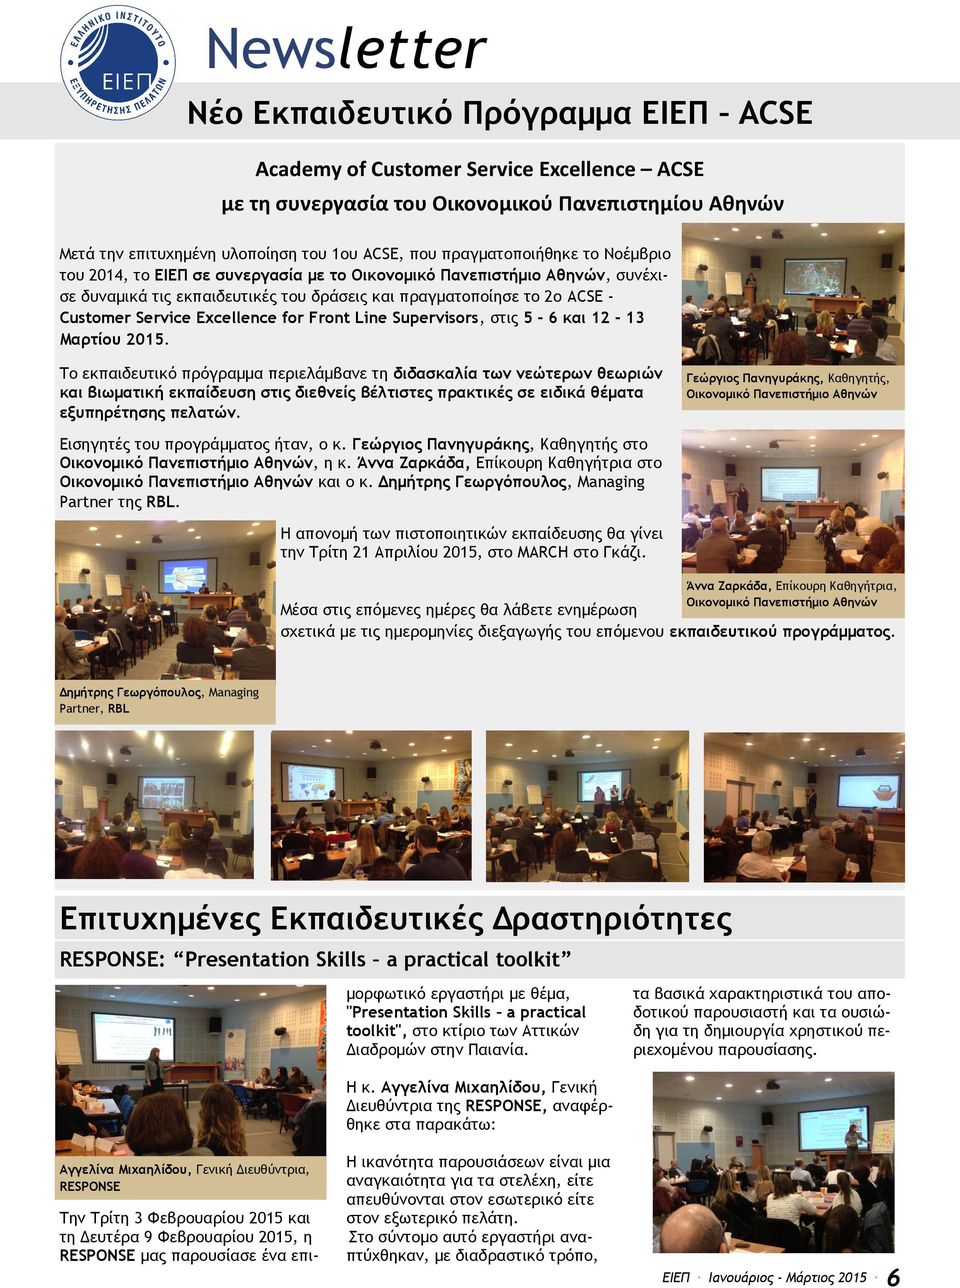 Excellence for Front Line Supervisors, στις 5-6 και 12-13 Μαρτίου 2015.